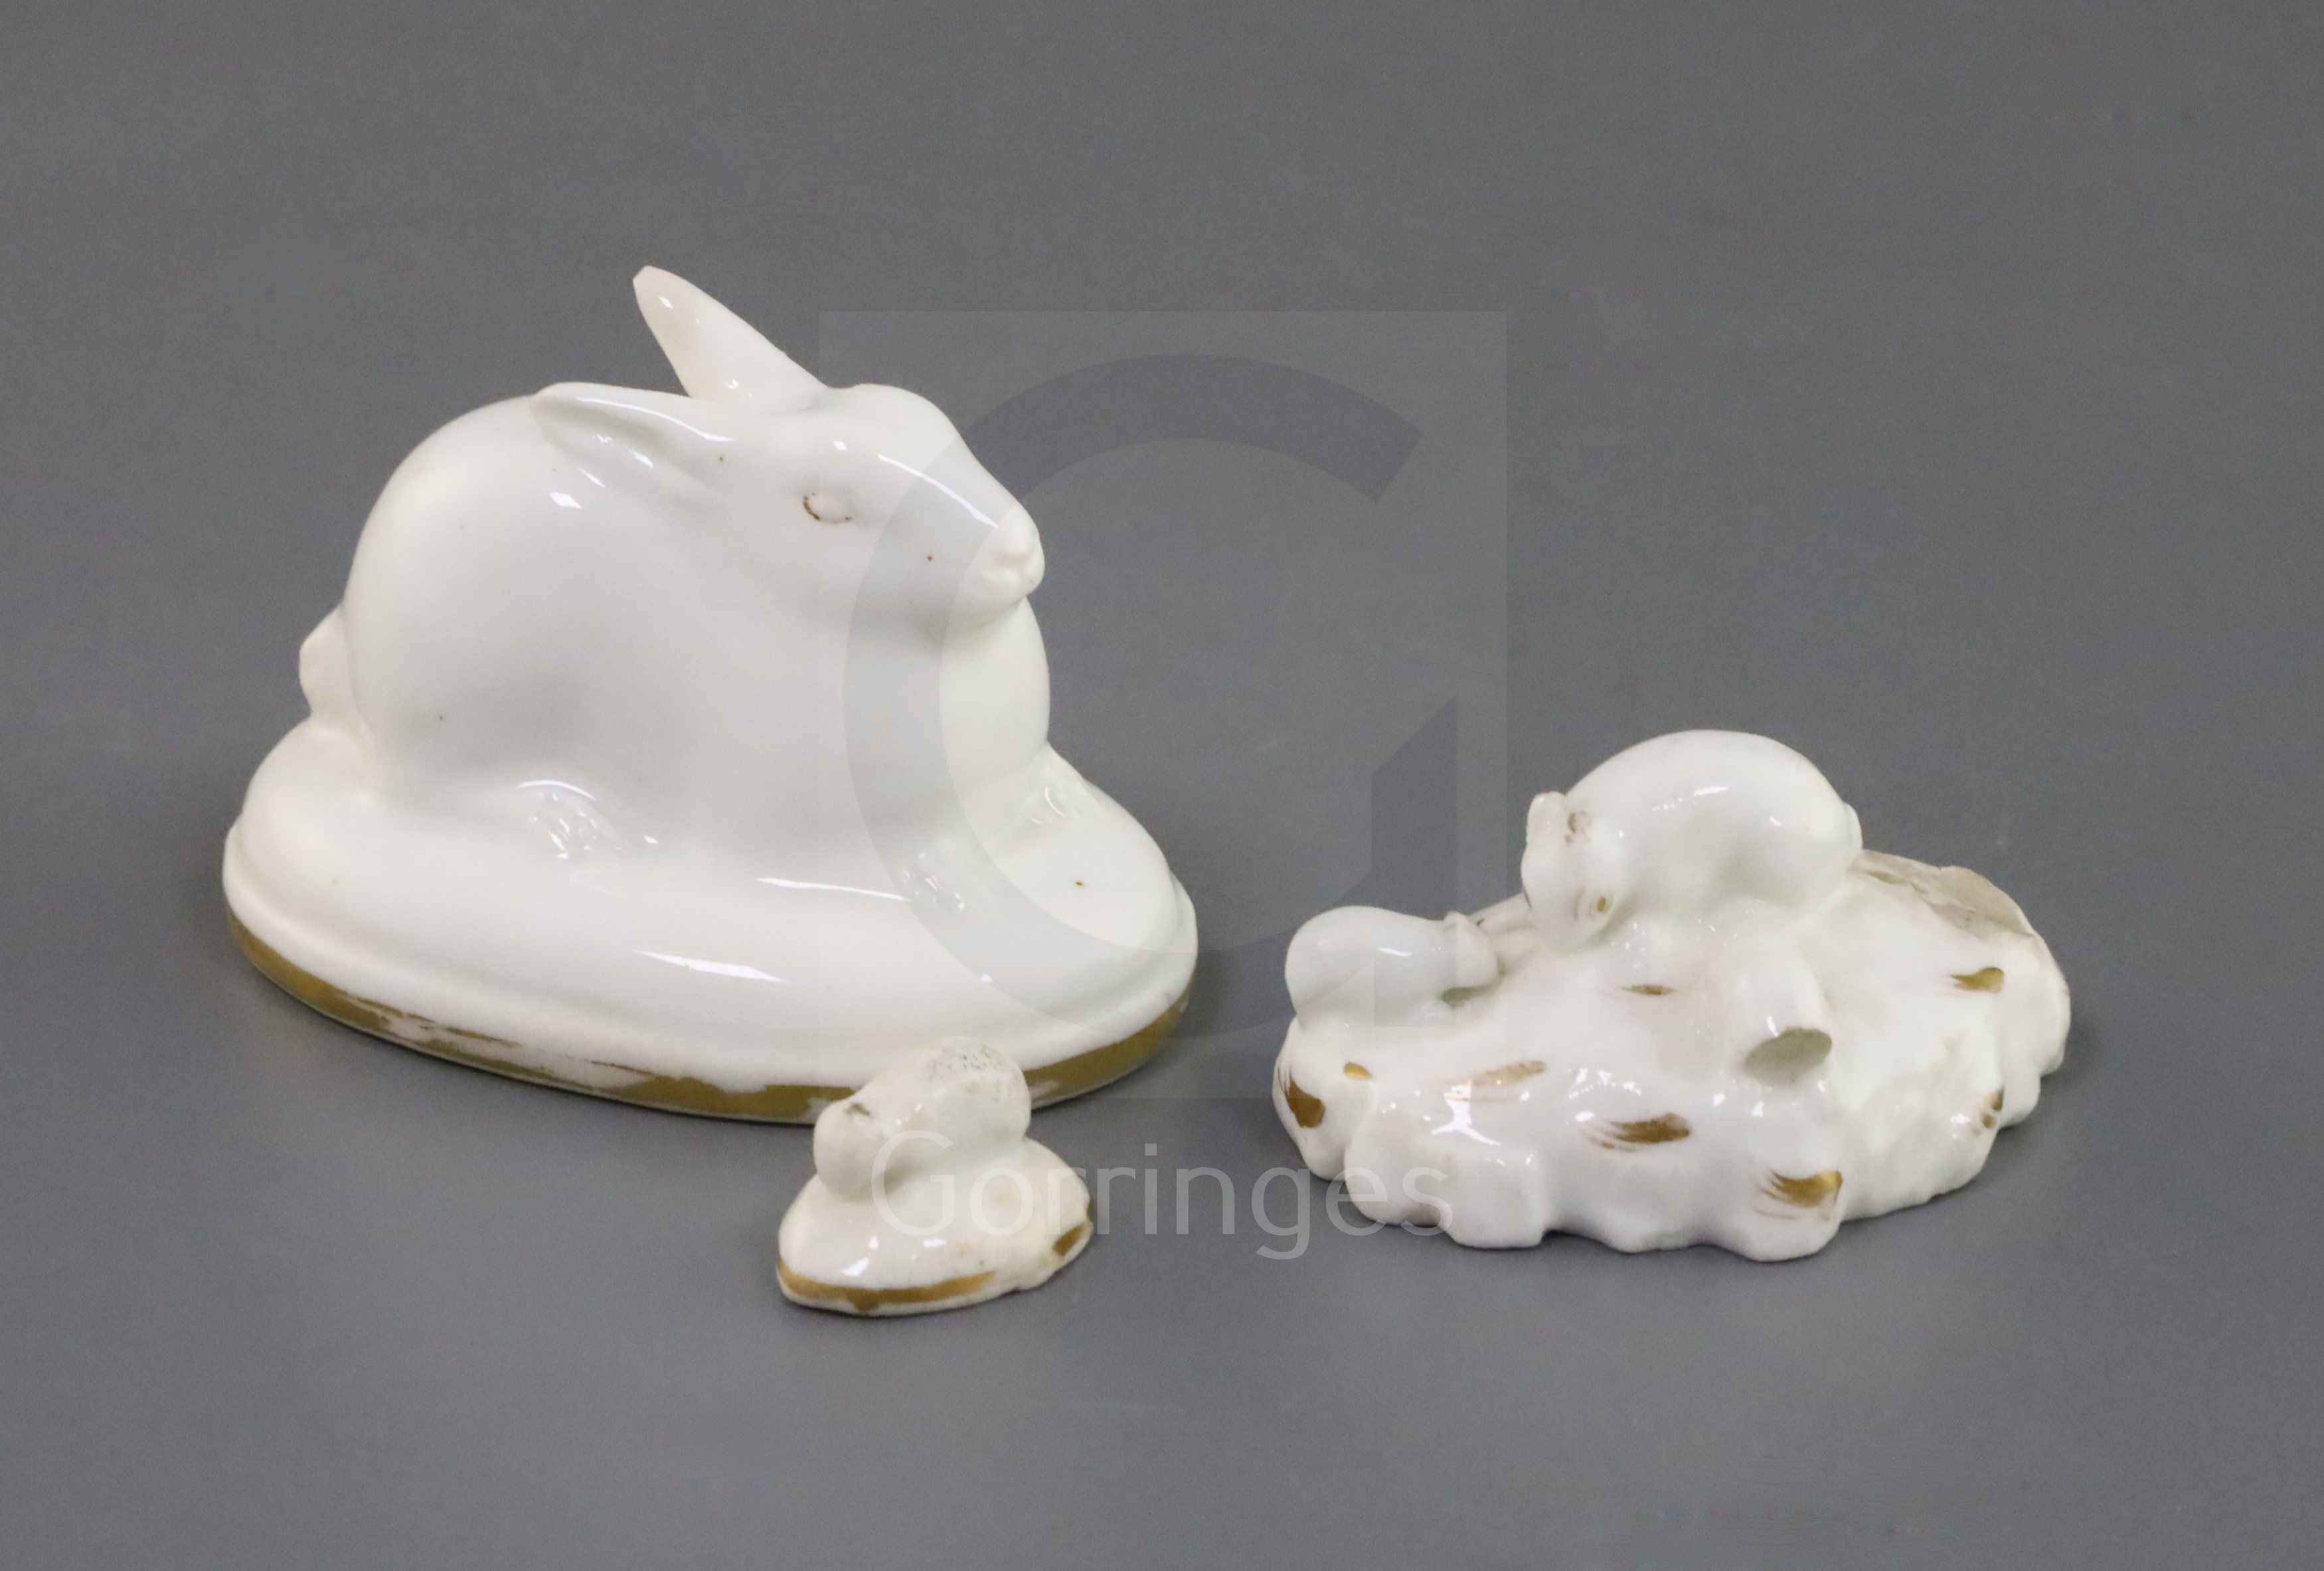 A Rockingham porcelain figure of a hare and two toy groups of rabbits, c.1830, all decorated in gilt